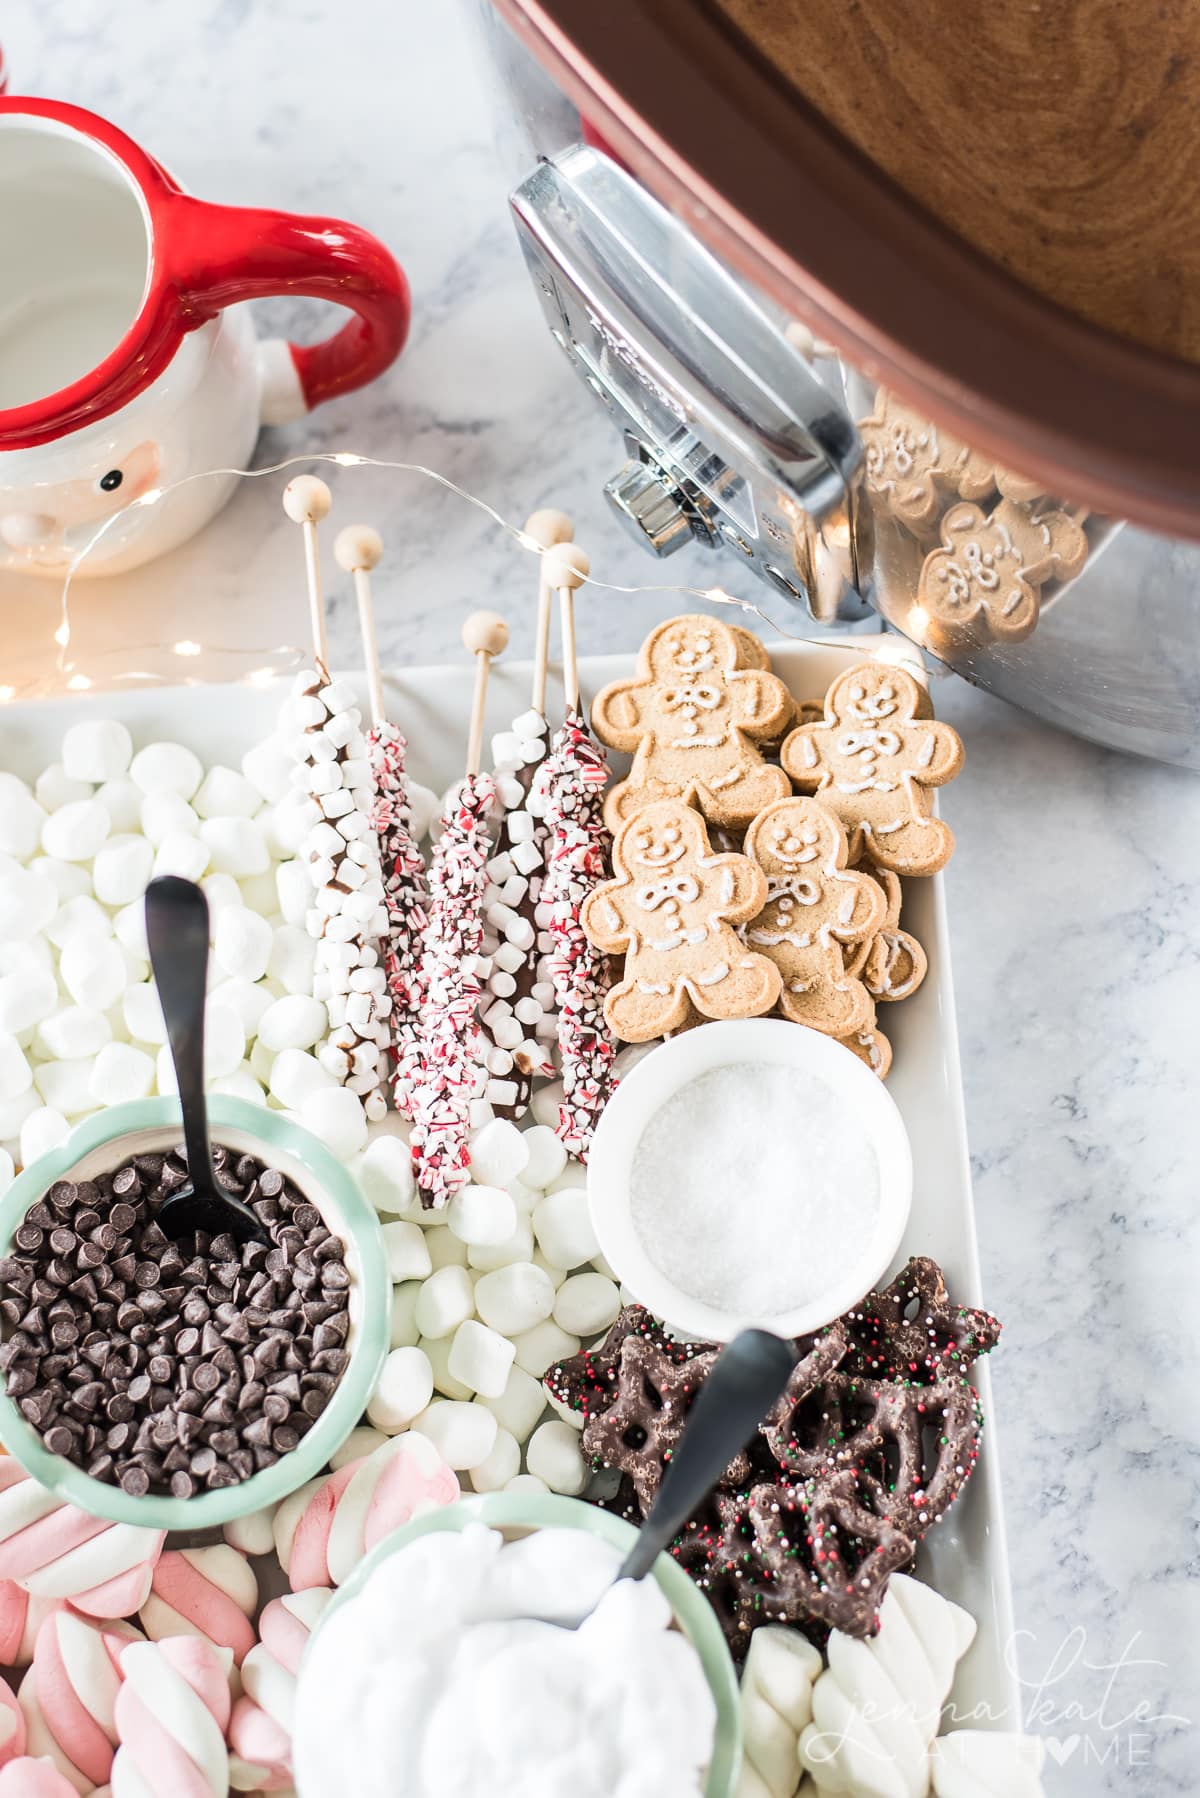 this easy Dessert Charcuterie Board has all the perfect accessories for a delicious cup of hot chocolate